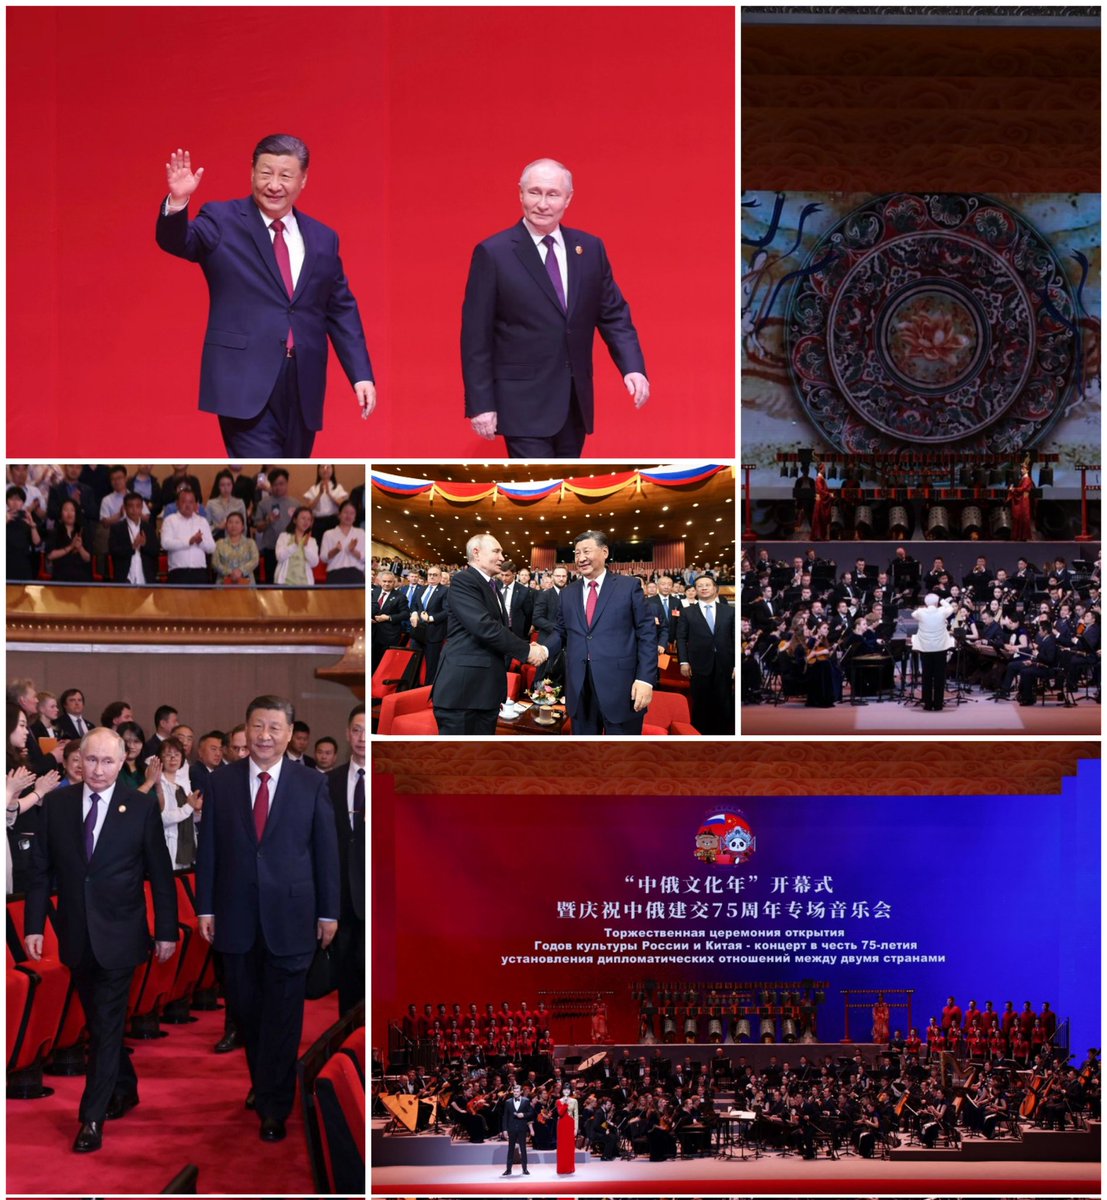 Pres Xi and Pres Putin jointly attended the opening ceremony of the #China-#Russia Yr of Culture and the concert celebrating the 75th anniversary of diplomatic ties.